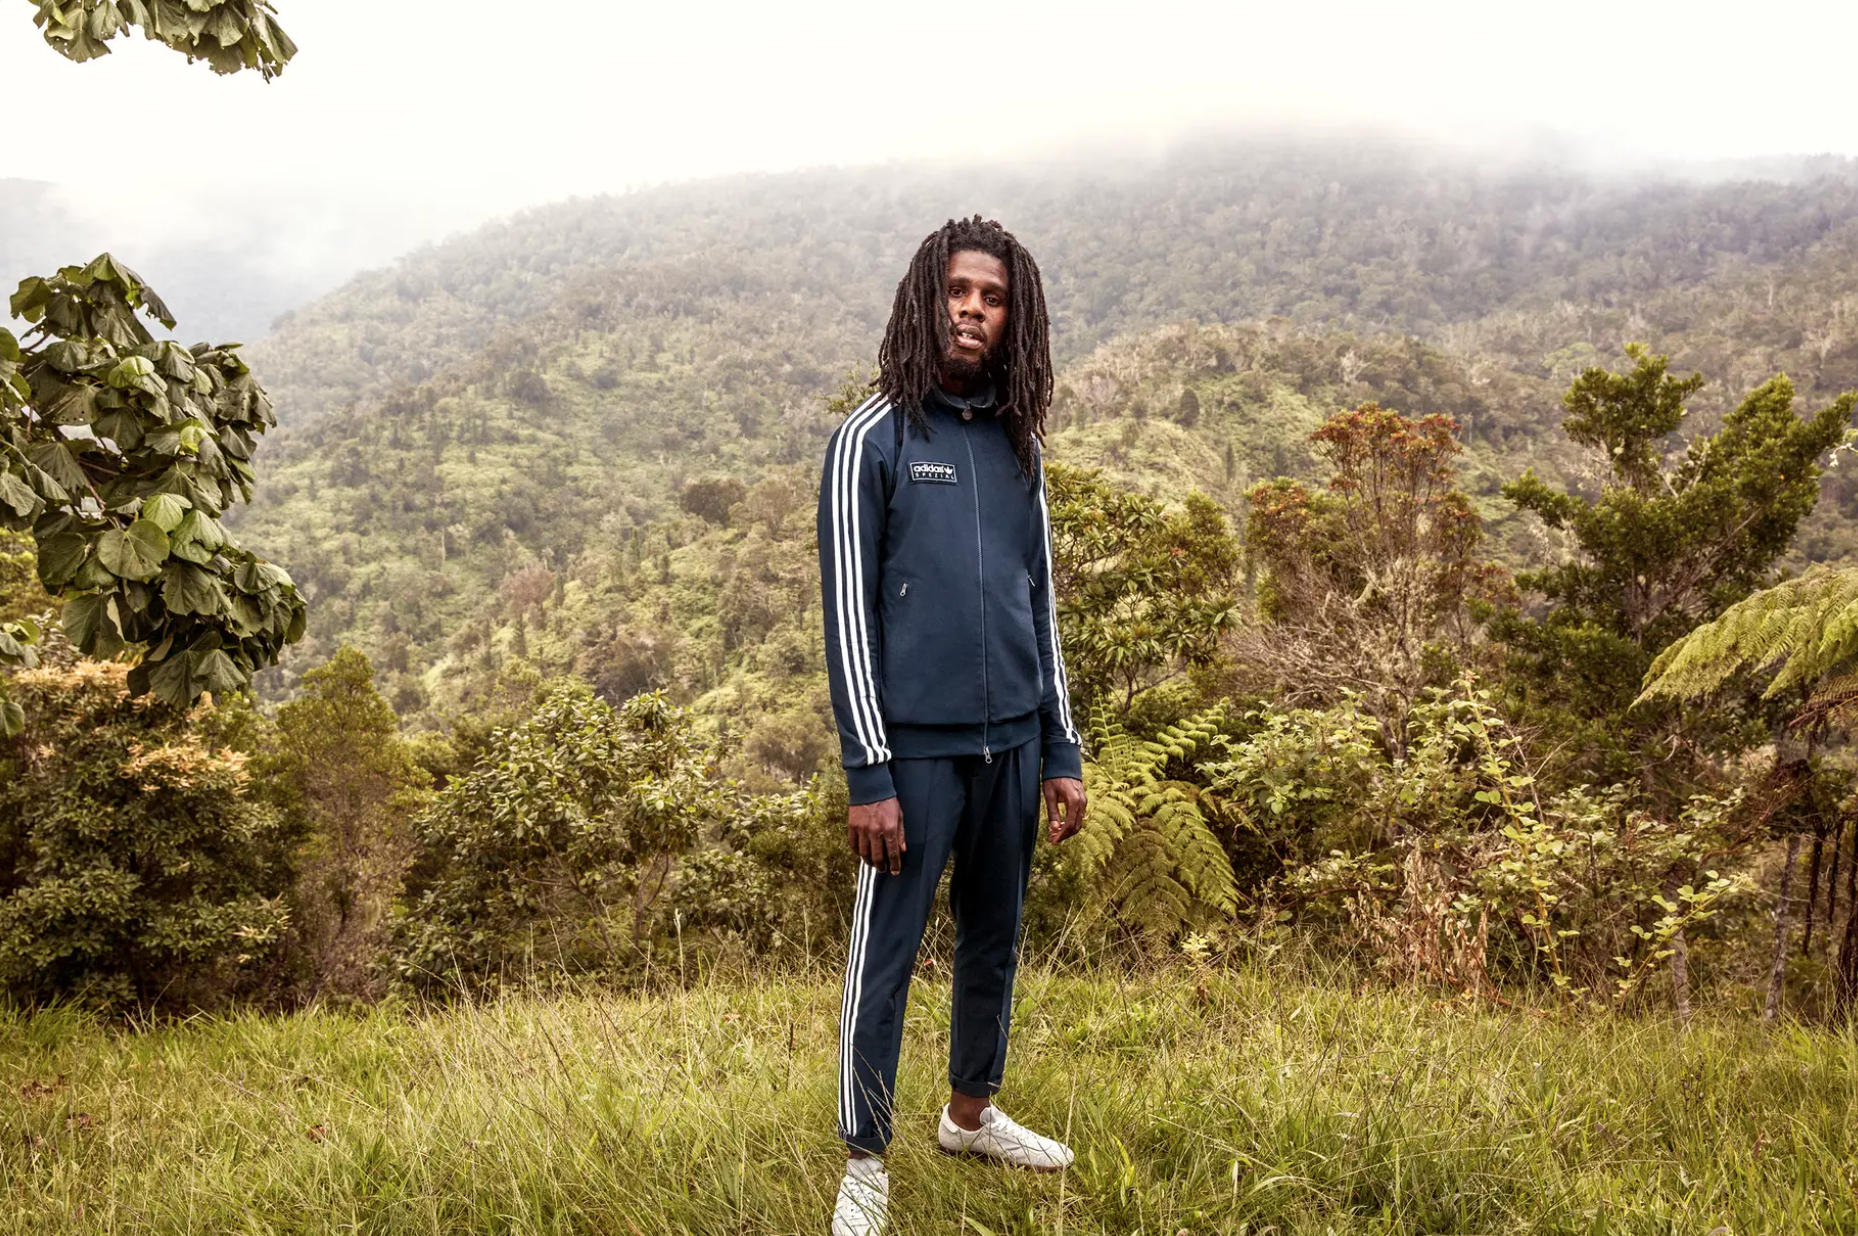 Person in athletic wear with sneakers standing in a forest clearing